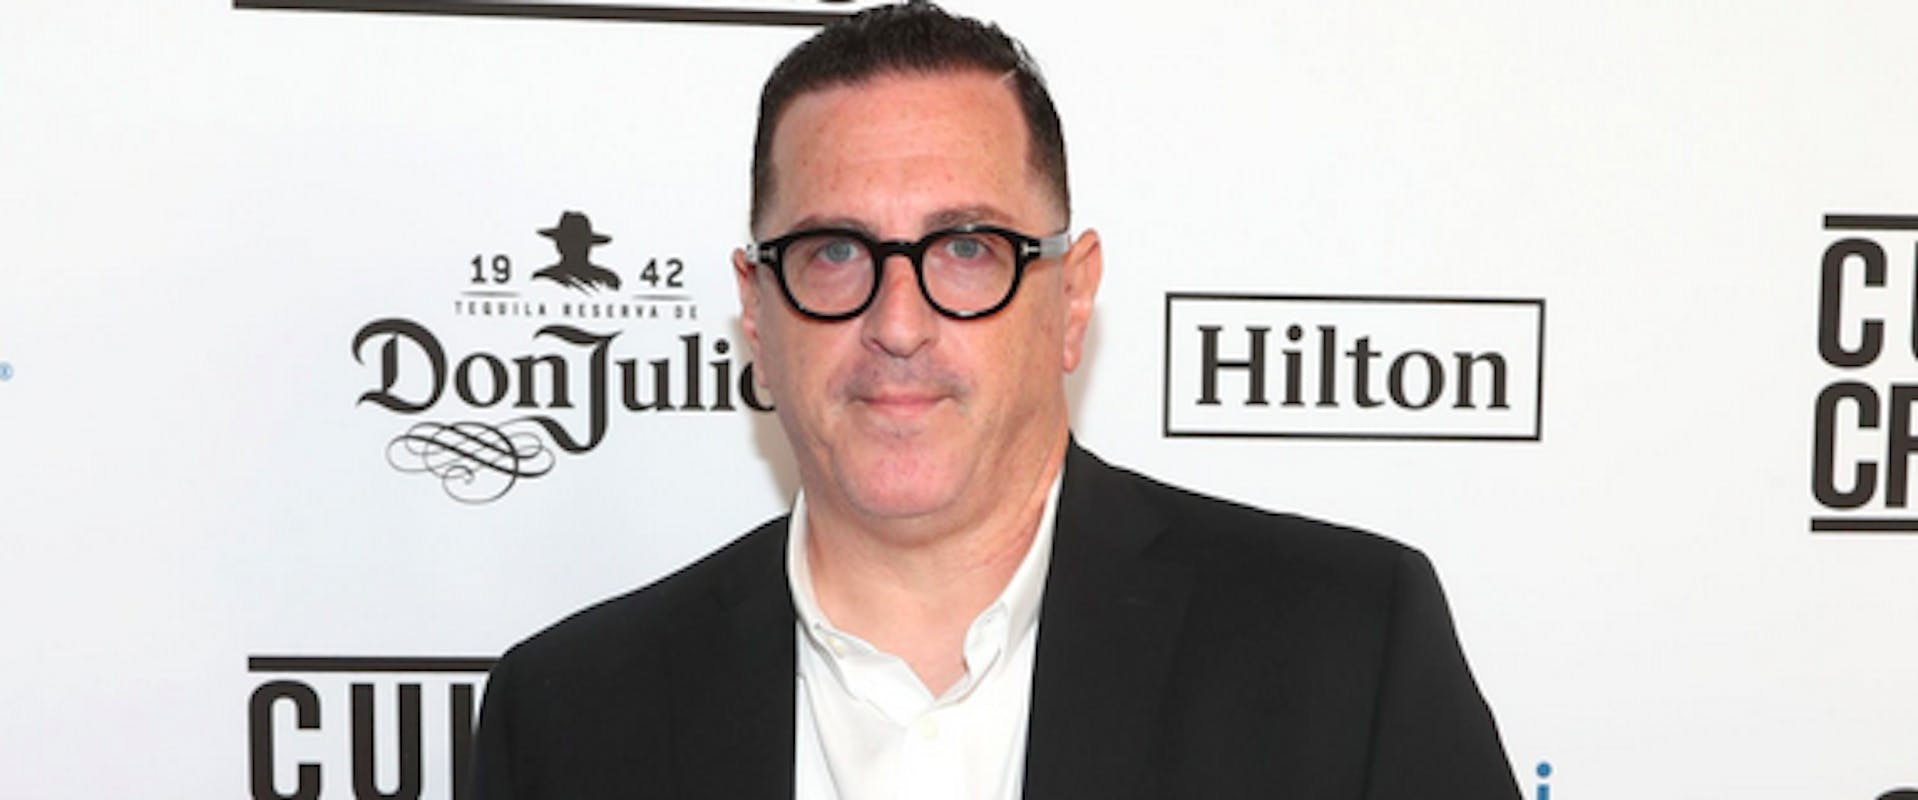 BEVERLY HILLS, CALIFORNIA - JUNE 22: MC Serch attends the Culture Creators 4th Annual Innovators & Leaders Awards Brunch at The Beverly Hilton Hotel on June 22, 2019 in Beverly Hills, California. 